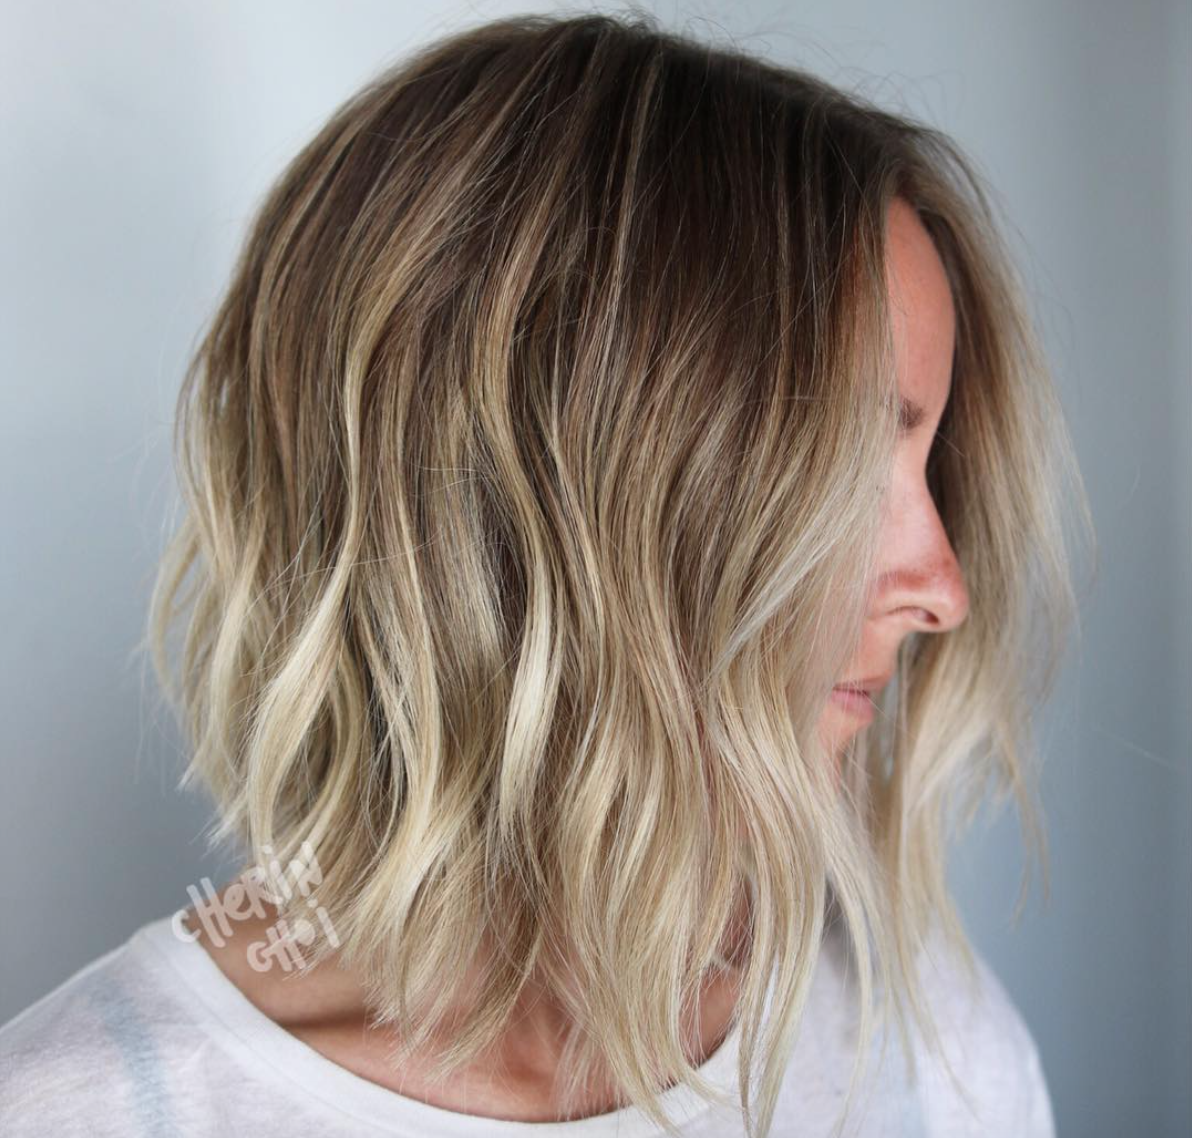 10 Short Ombré Hairstyles We Love